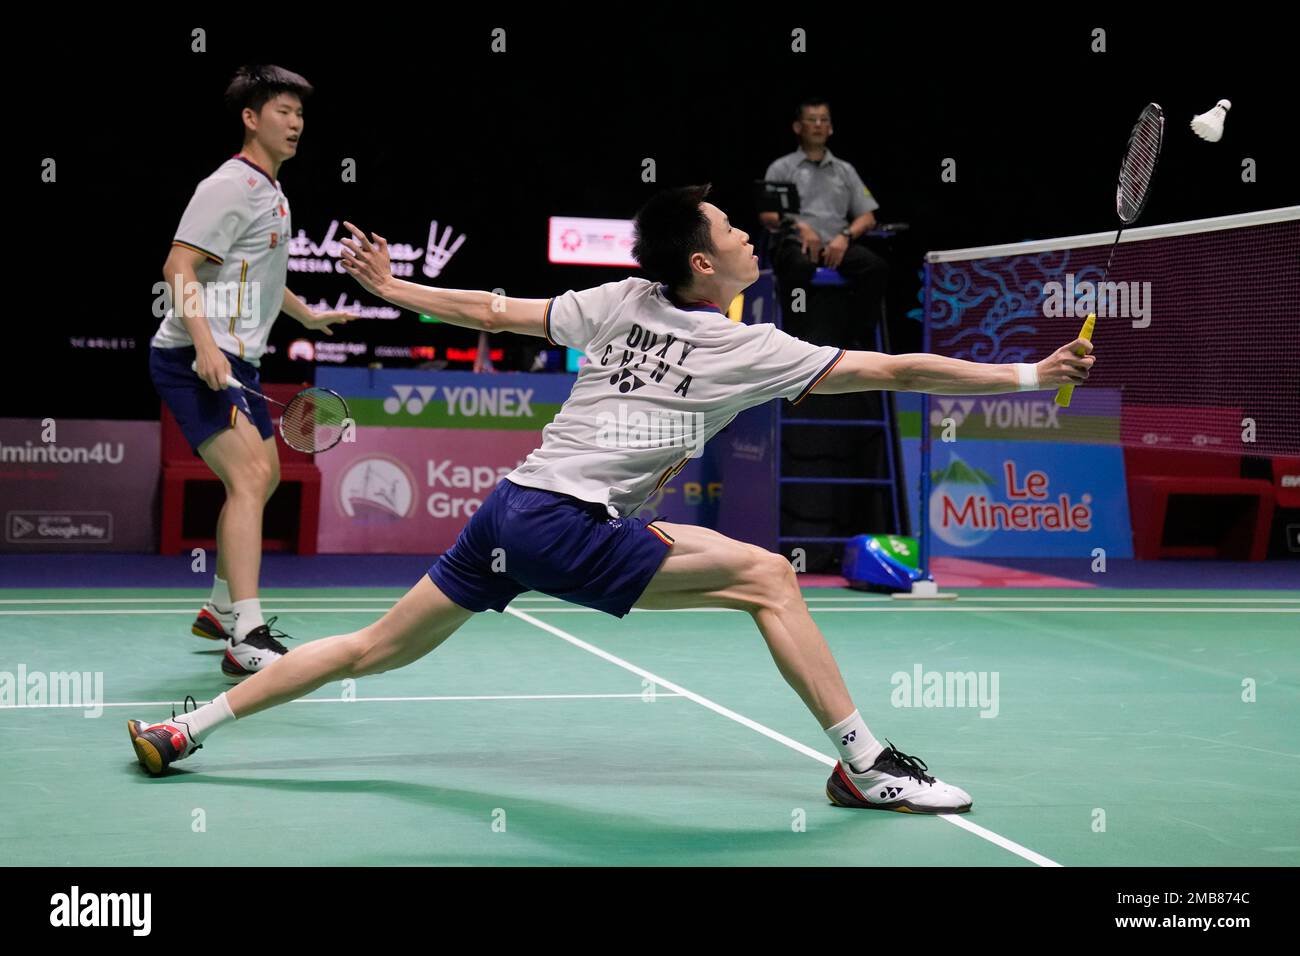 Chinas Liu Yu Chen, left, and Ou Xuan Yi compete against Malaysias Aaron Chia and Soh Wooi Yik during their mens doubles semifinal match at Indonesia Open badminton tournament at Istora Gelora